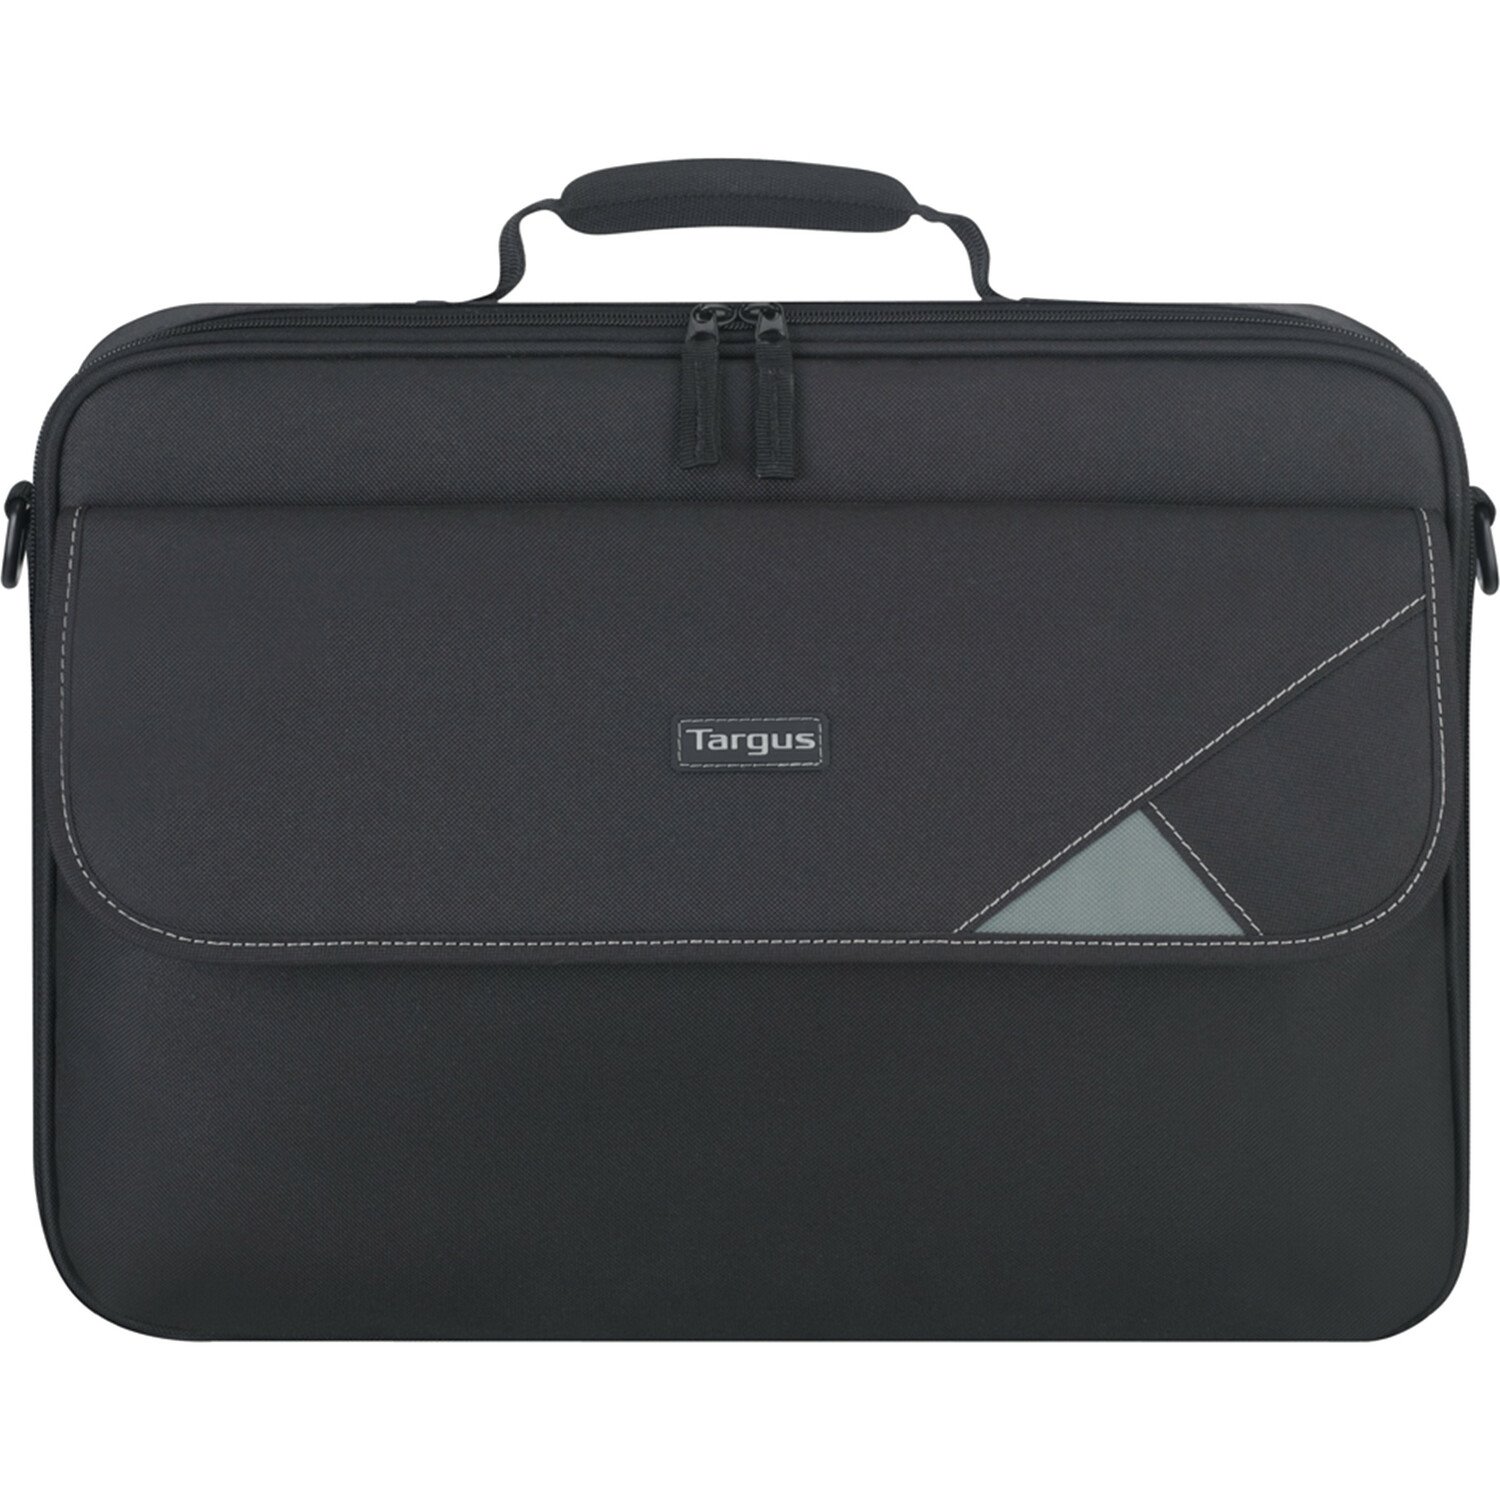 Targus Intellect Carrying Case for 39.6 cm (15.6") to 40.6 cm (16") Notebook - Black, Grey